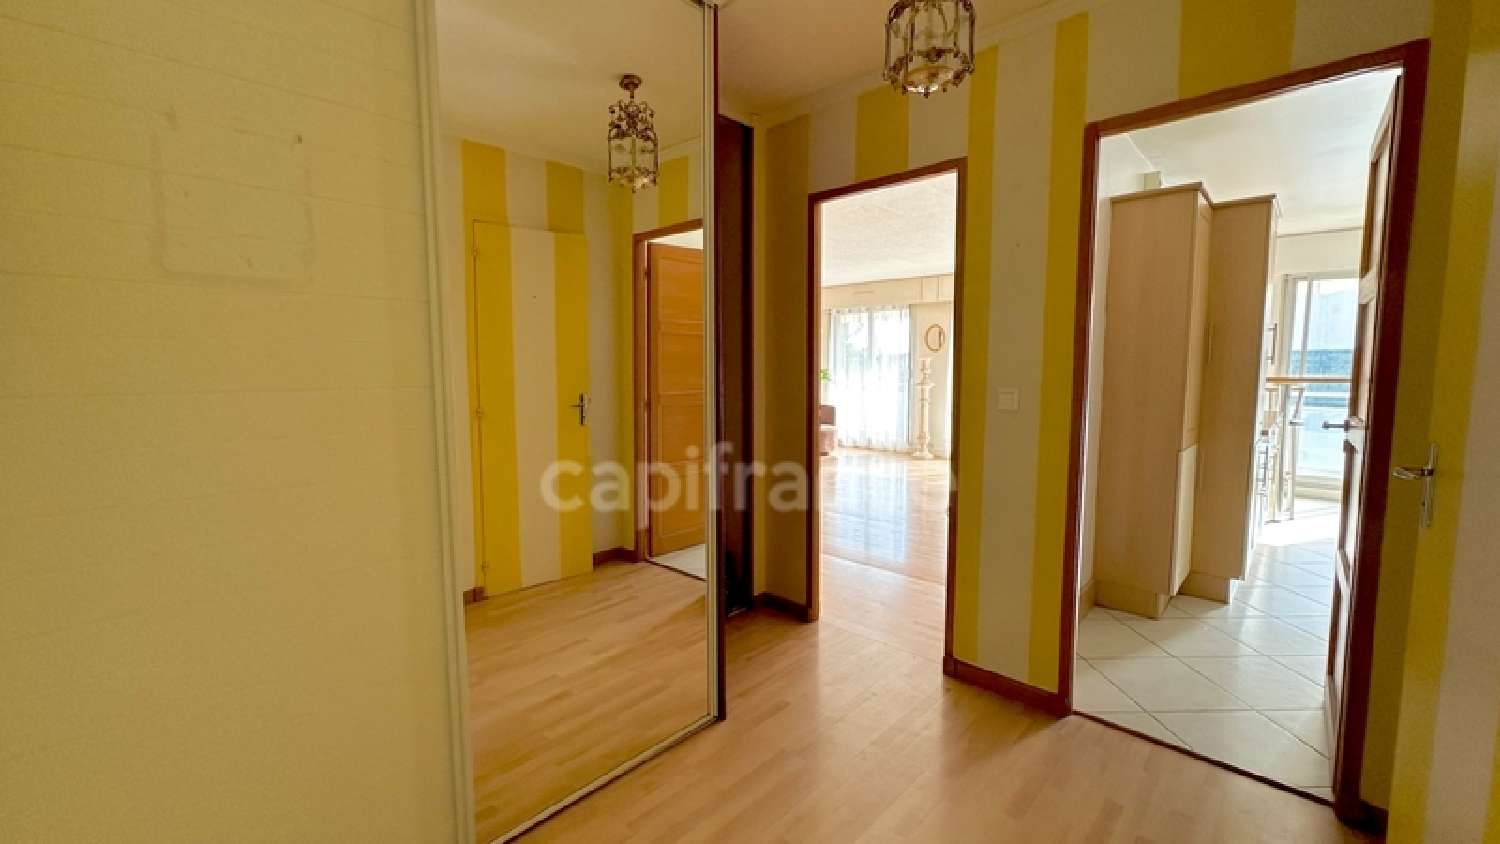 Le Chesnay Yvelines appartement foto 6866137